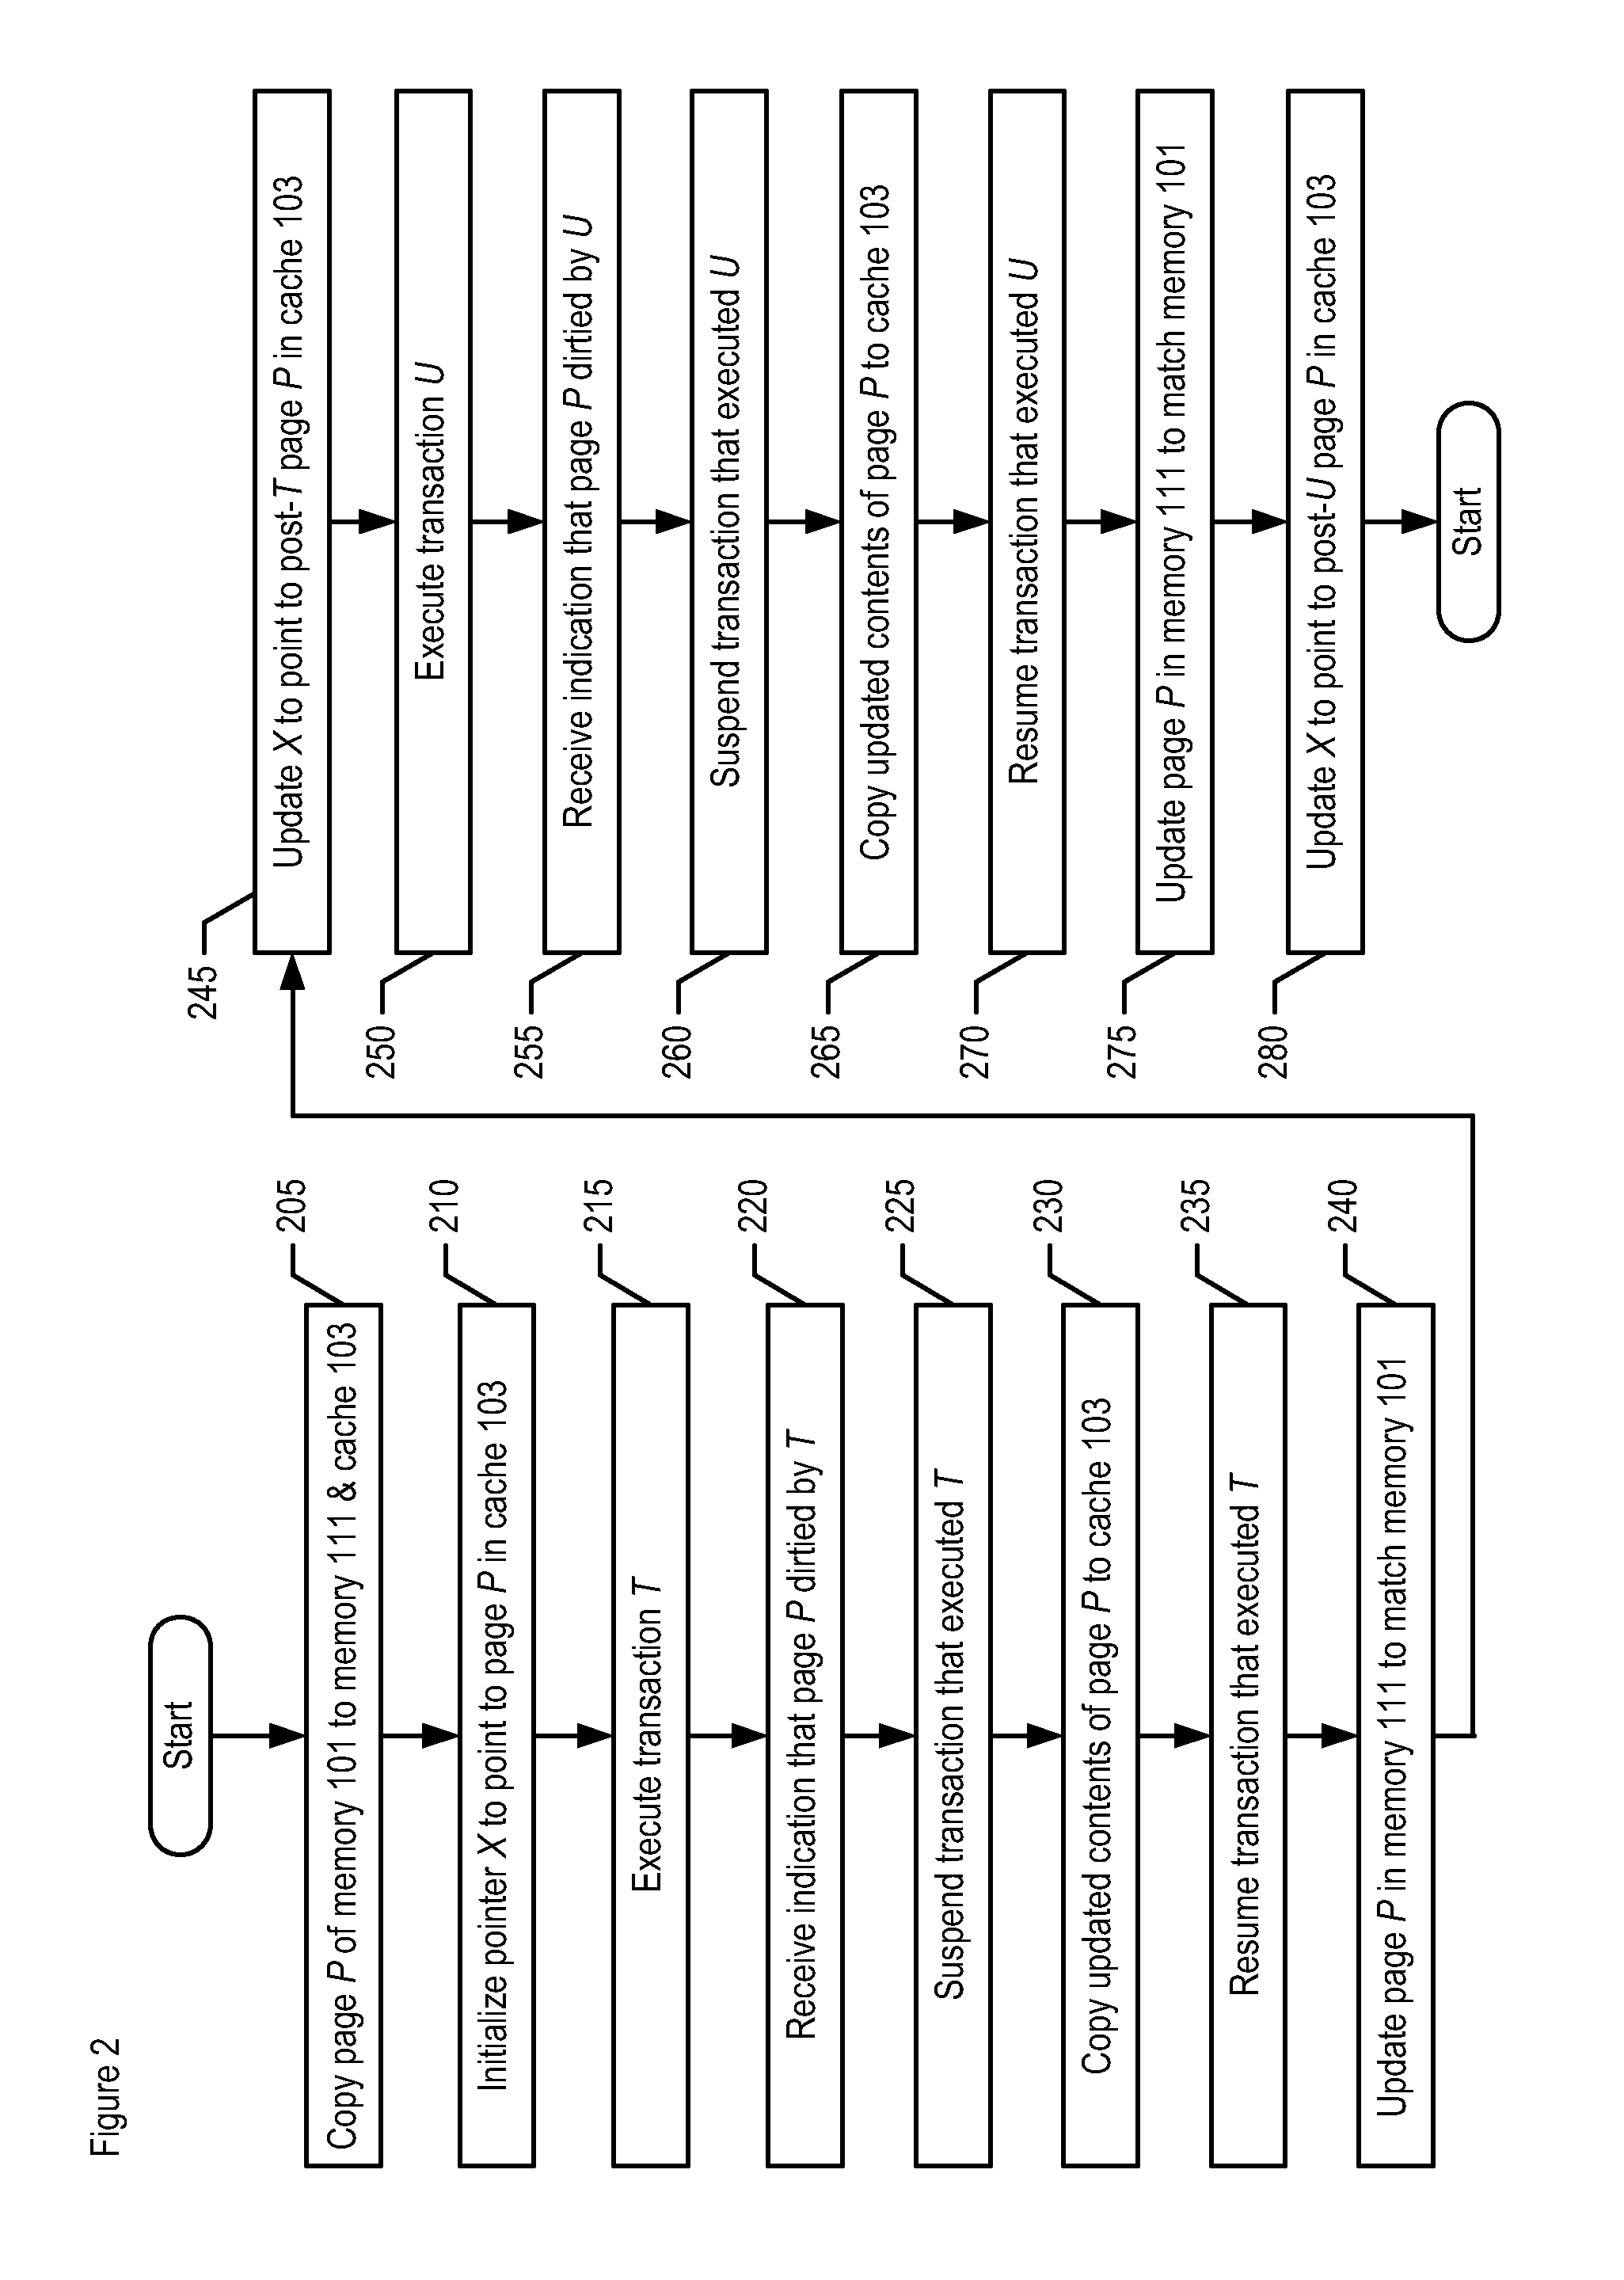 Cache management for increasing performance of high-availability multi-core systems